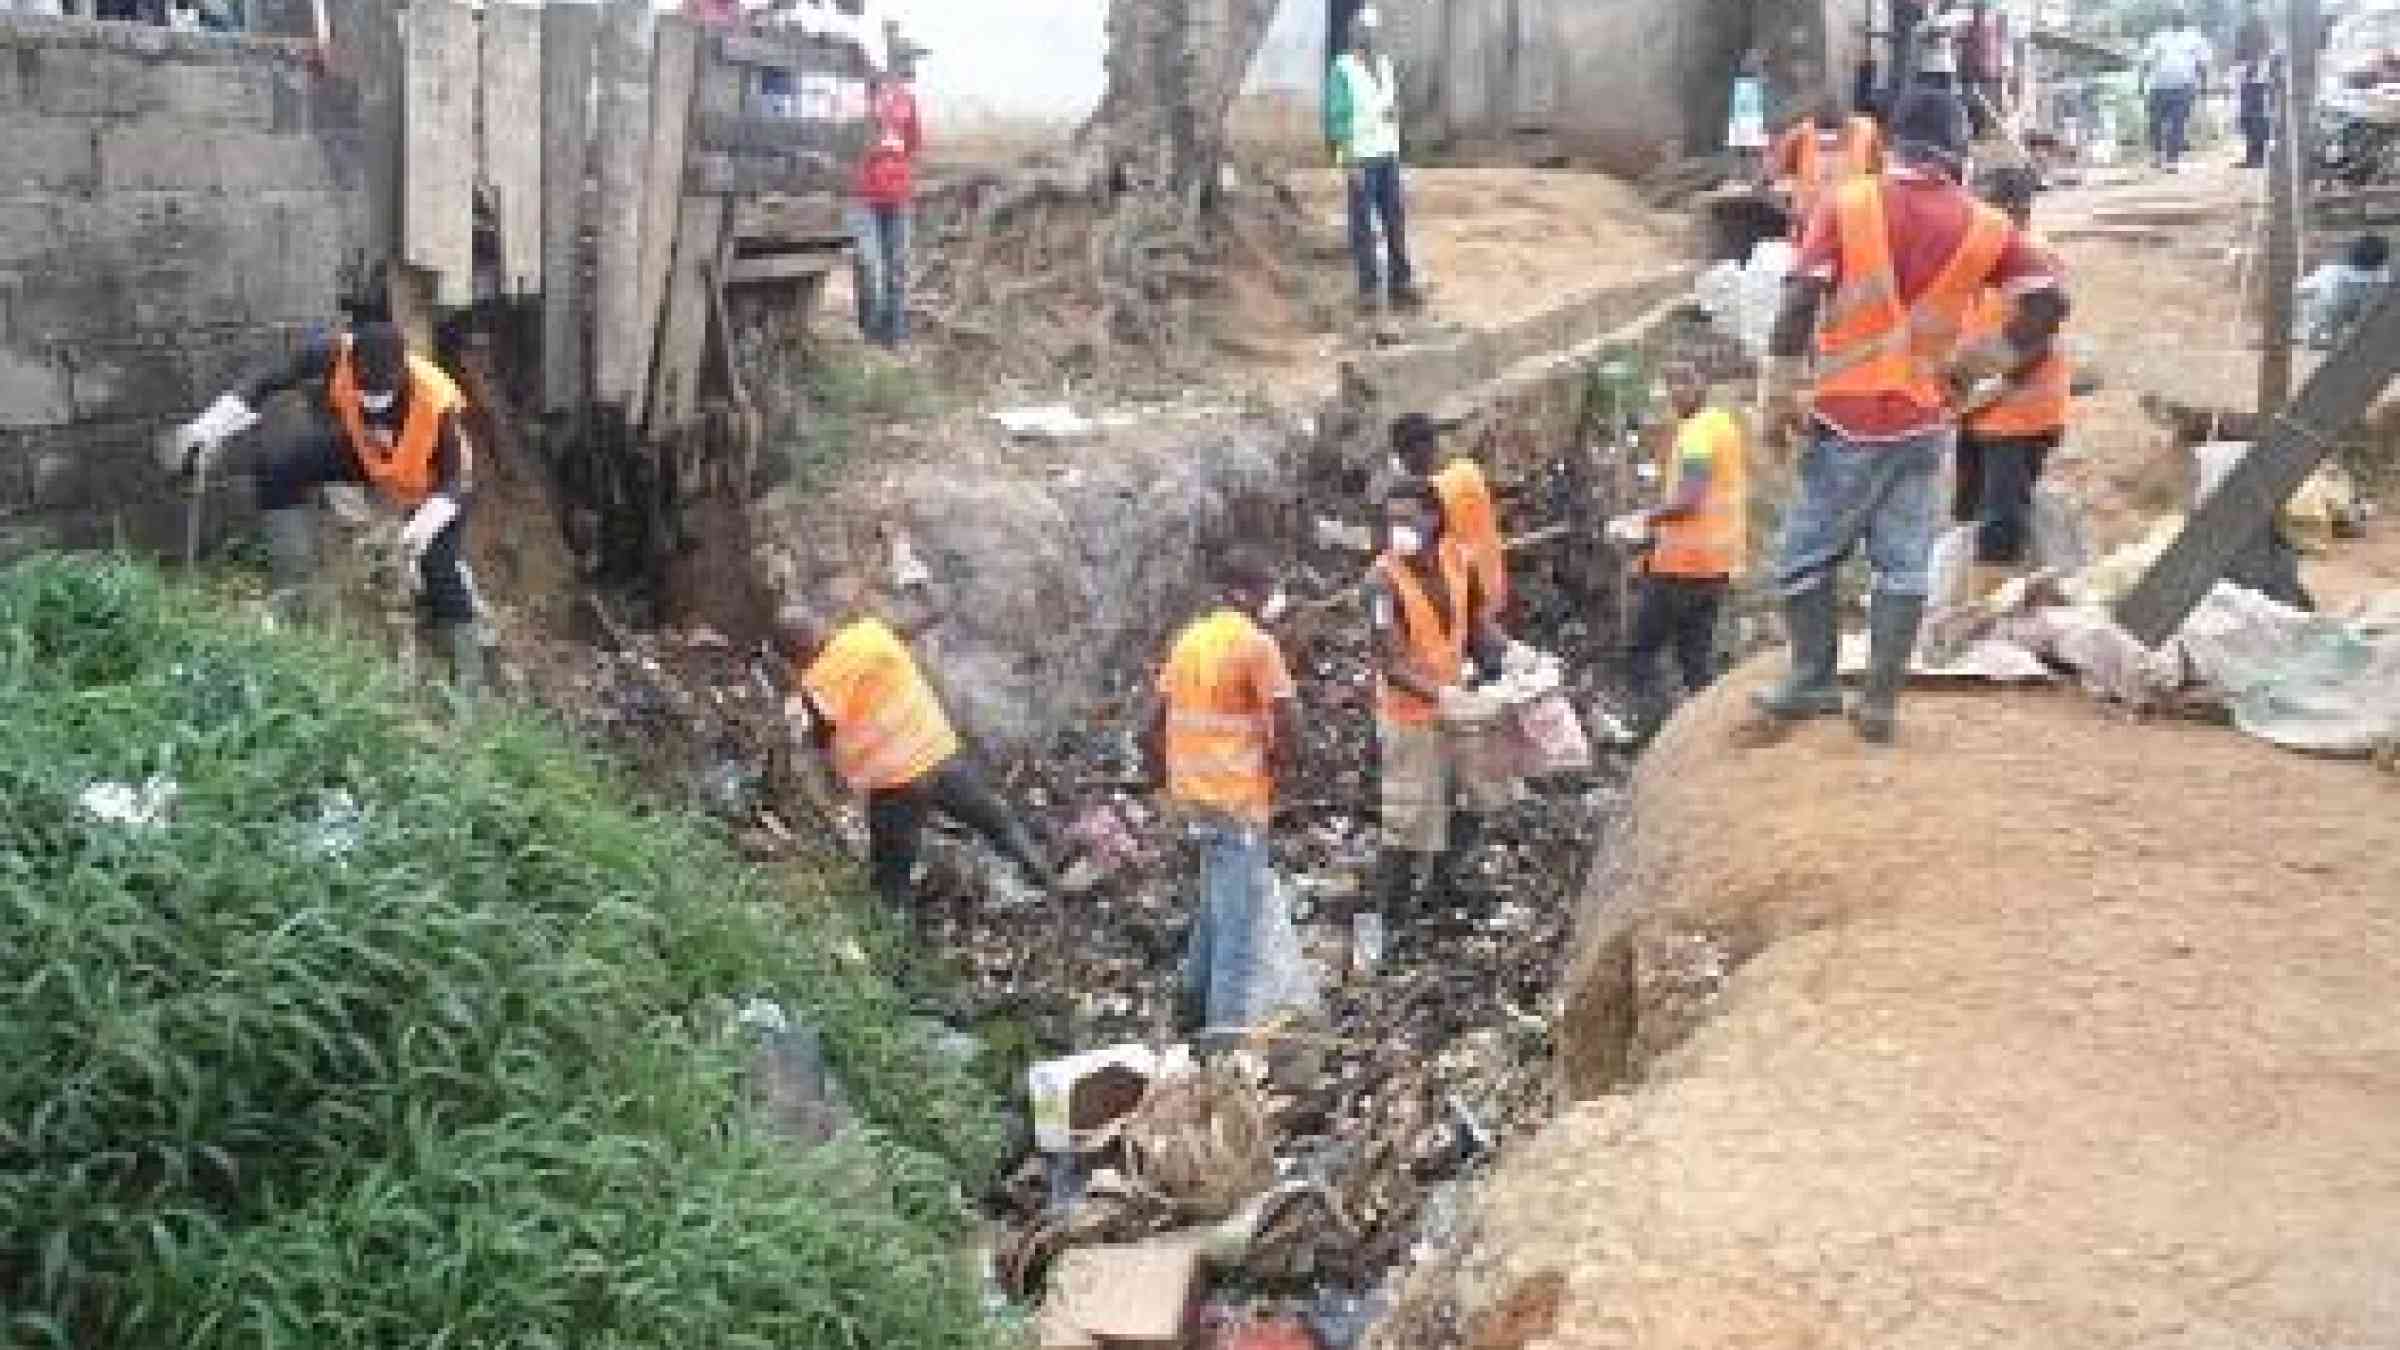 Local residents clear a trash-strewn drainage ditch in Nkolbikok, in Cameroon's capital Yaoundé, where the community has mobilized to reduce flood risk (Photo: Mairie de Yaoundé 6)